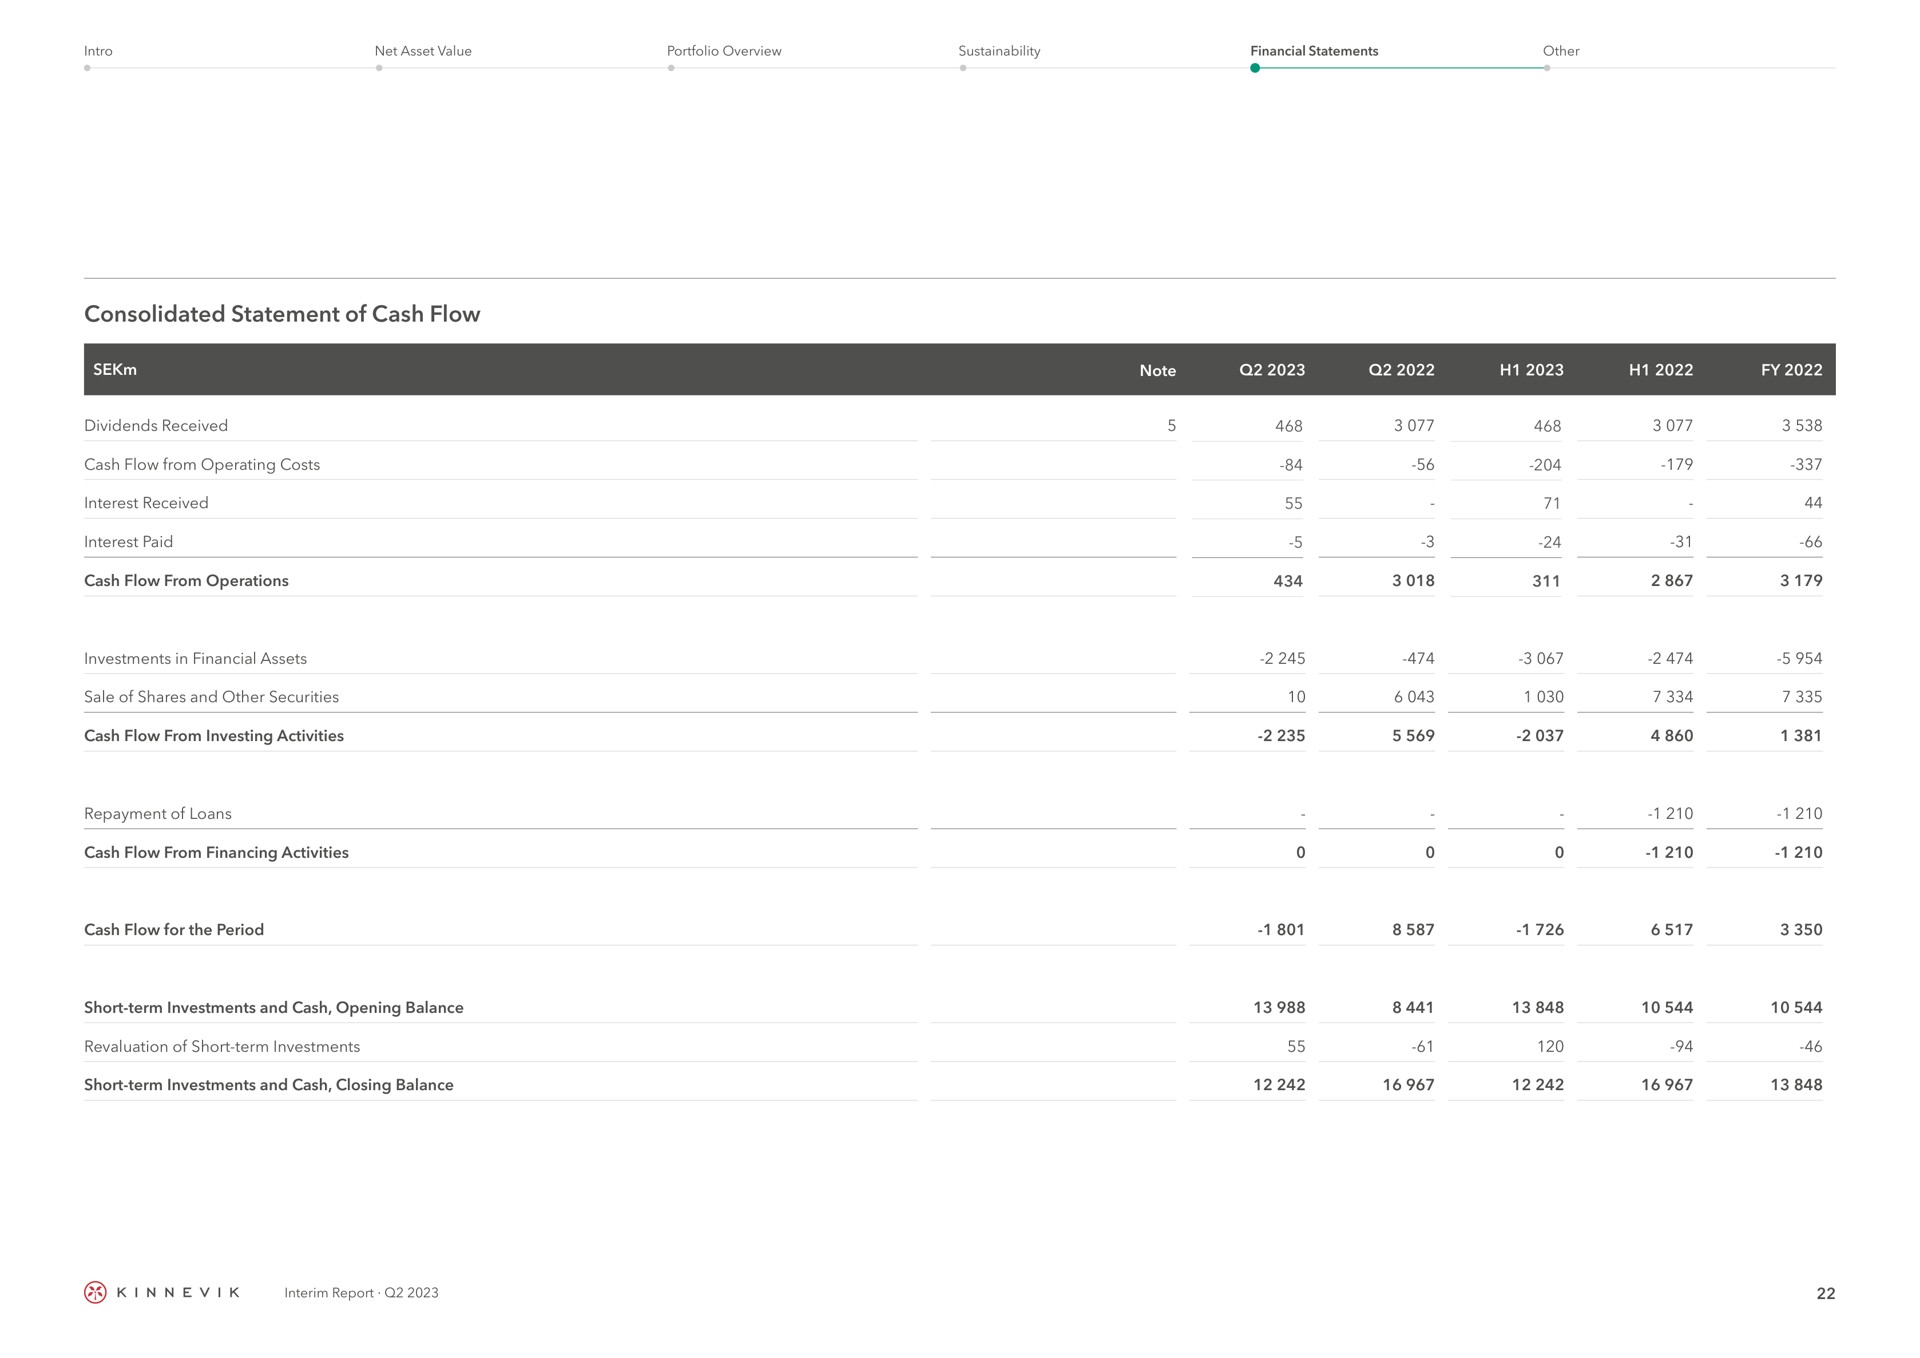 consolidated statement of cash flow | Kinnevik